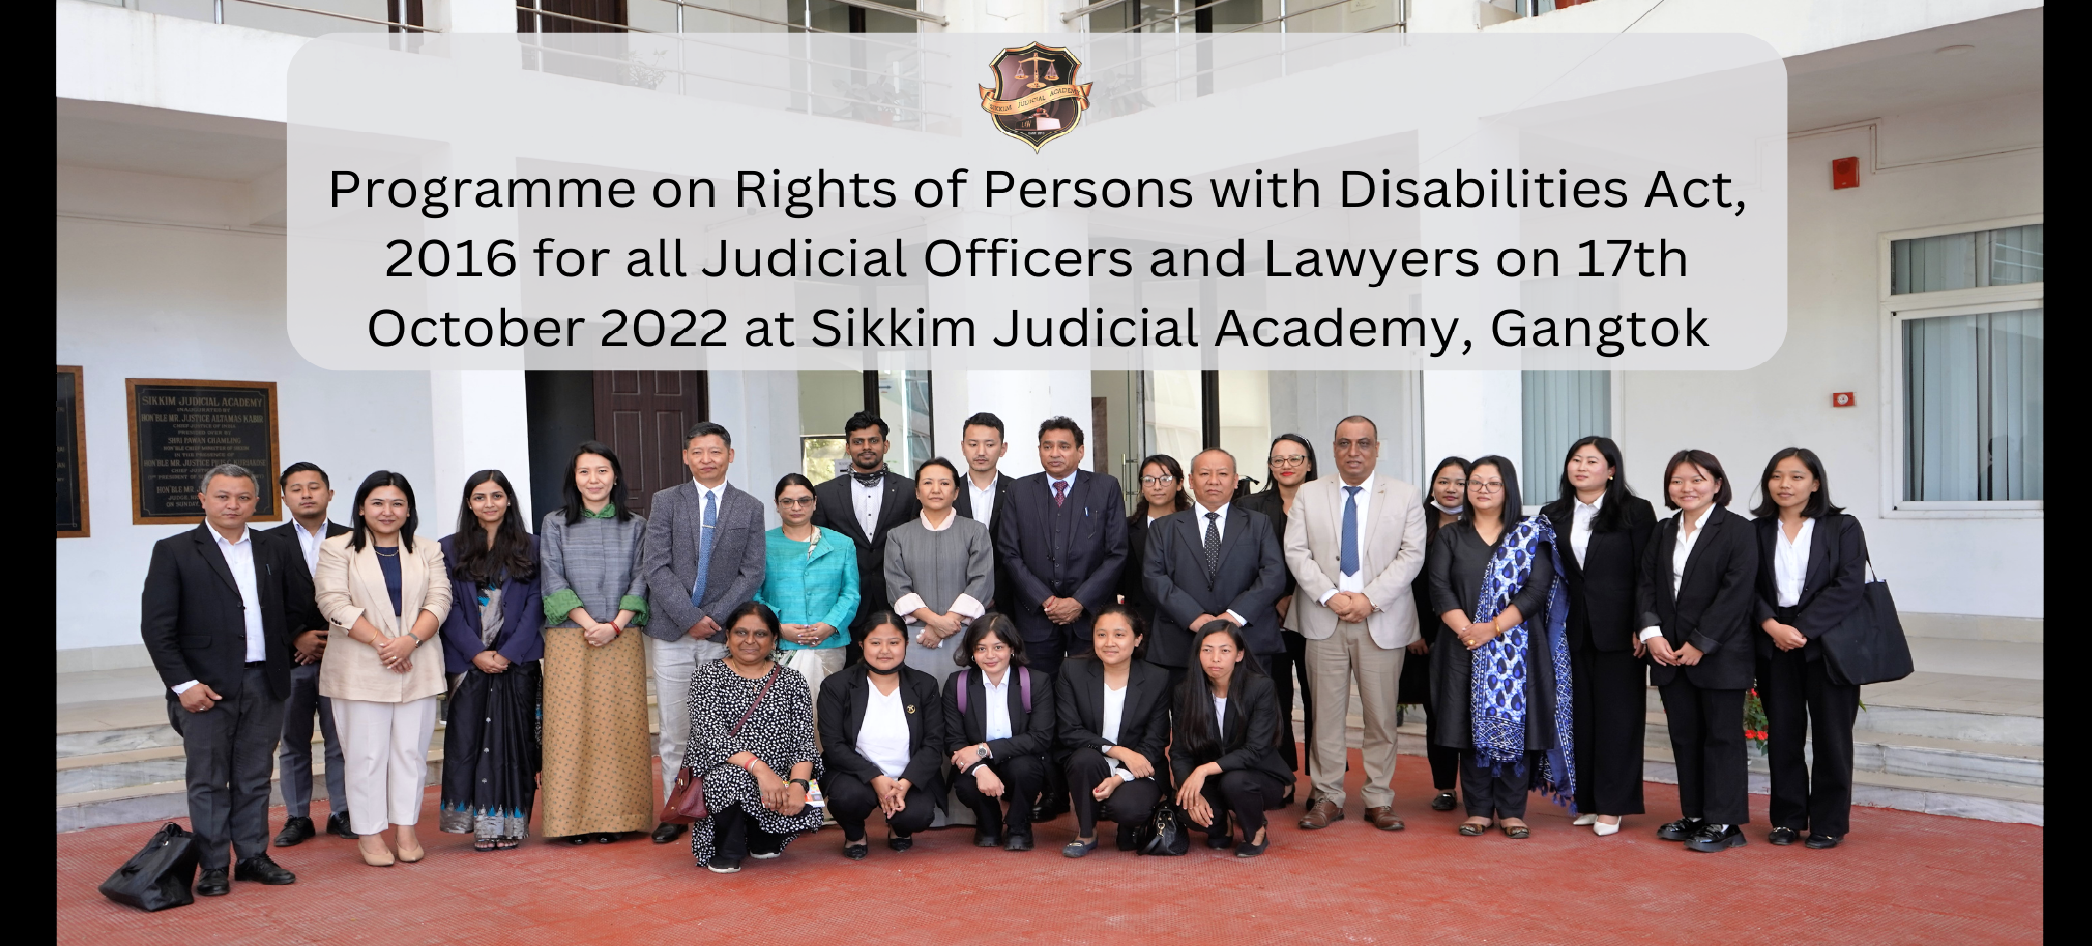 Programme on Rights of Persons with Disabilities Act, 2016 for all Judicial Officers and Lawyers on 17th October 2022